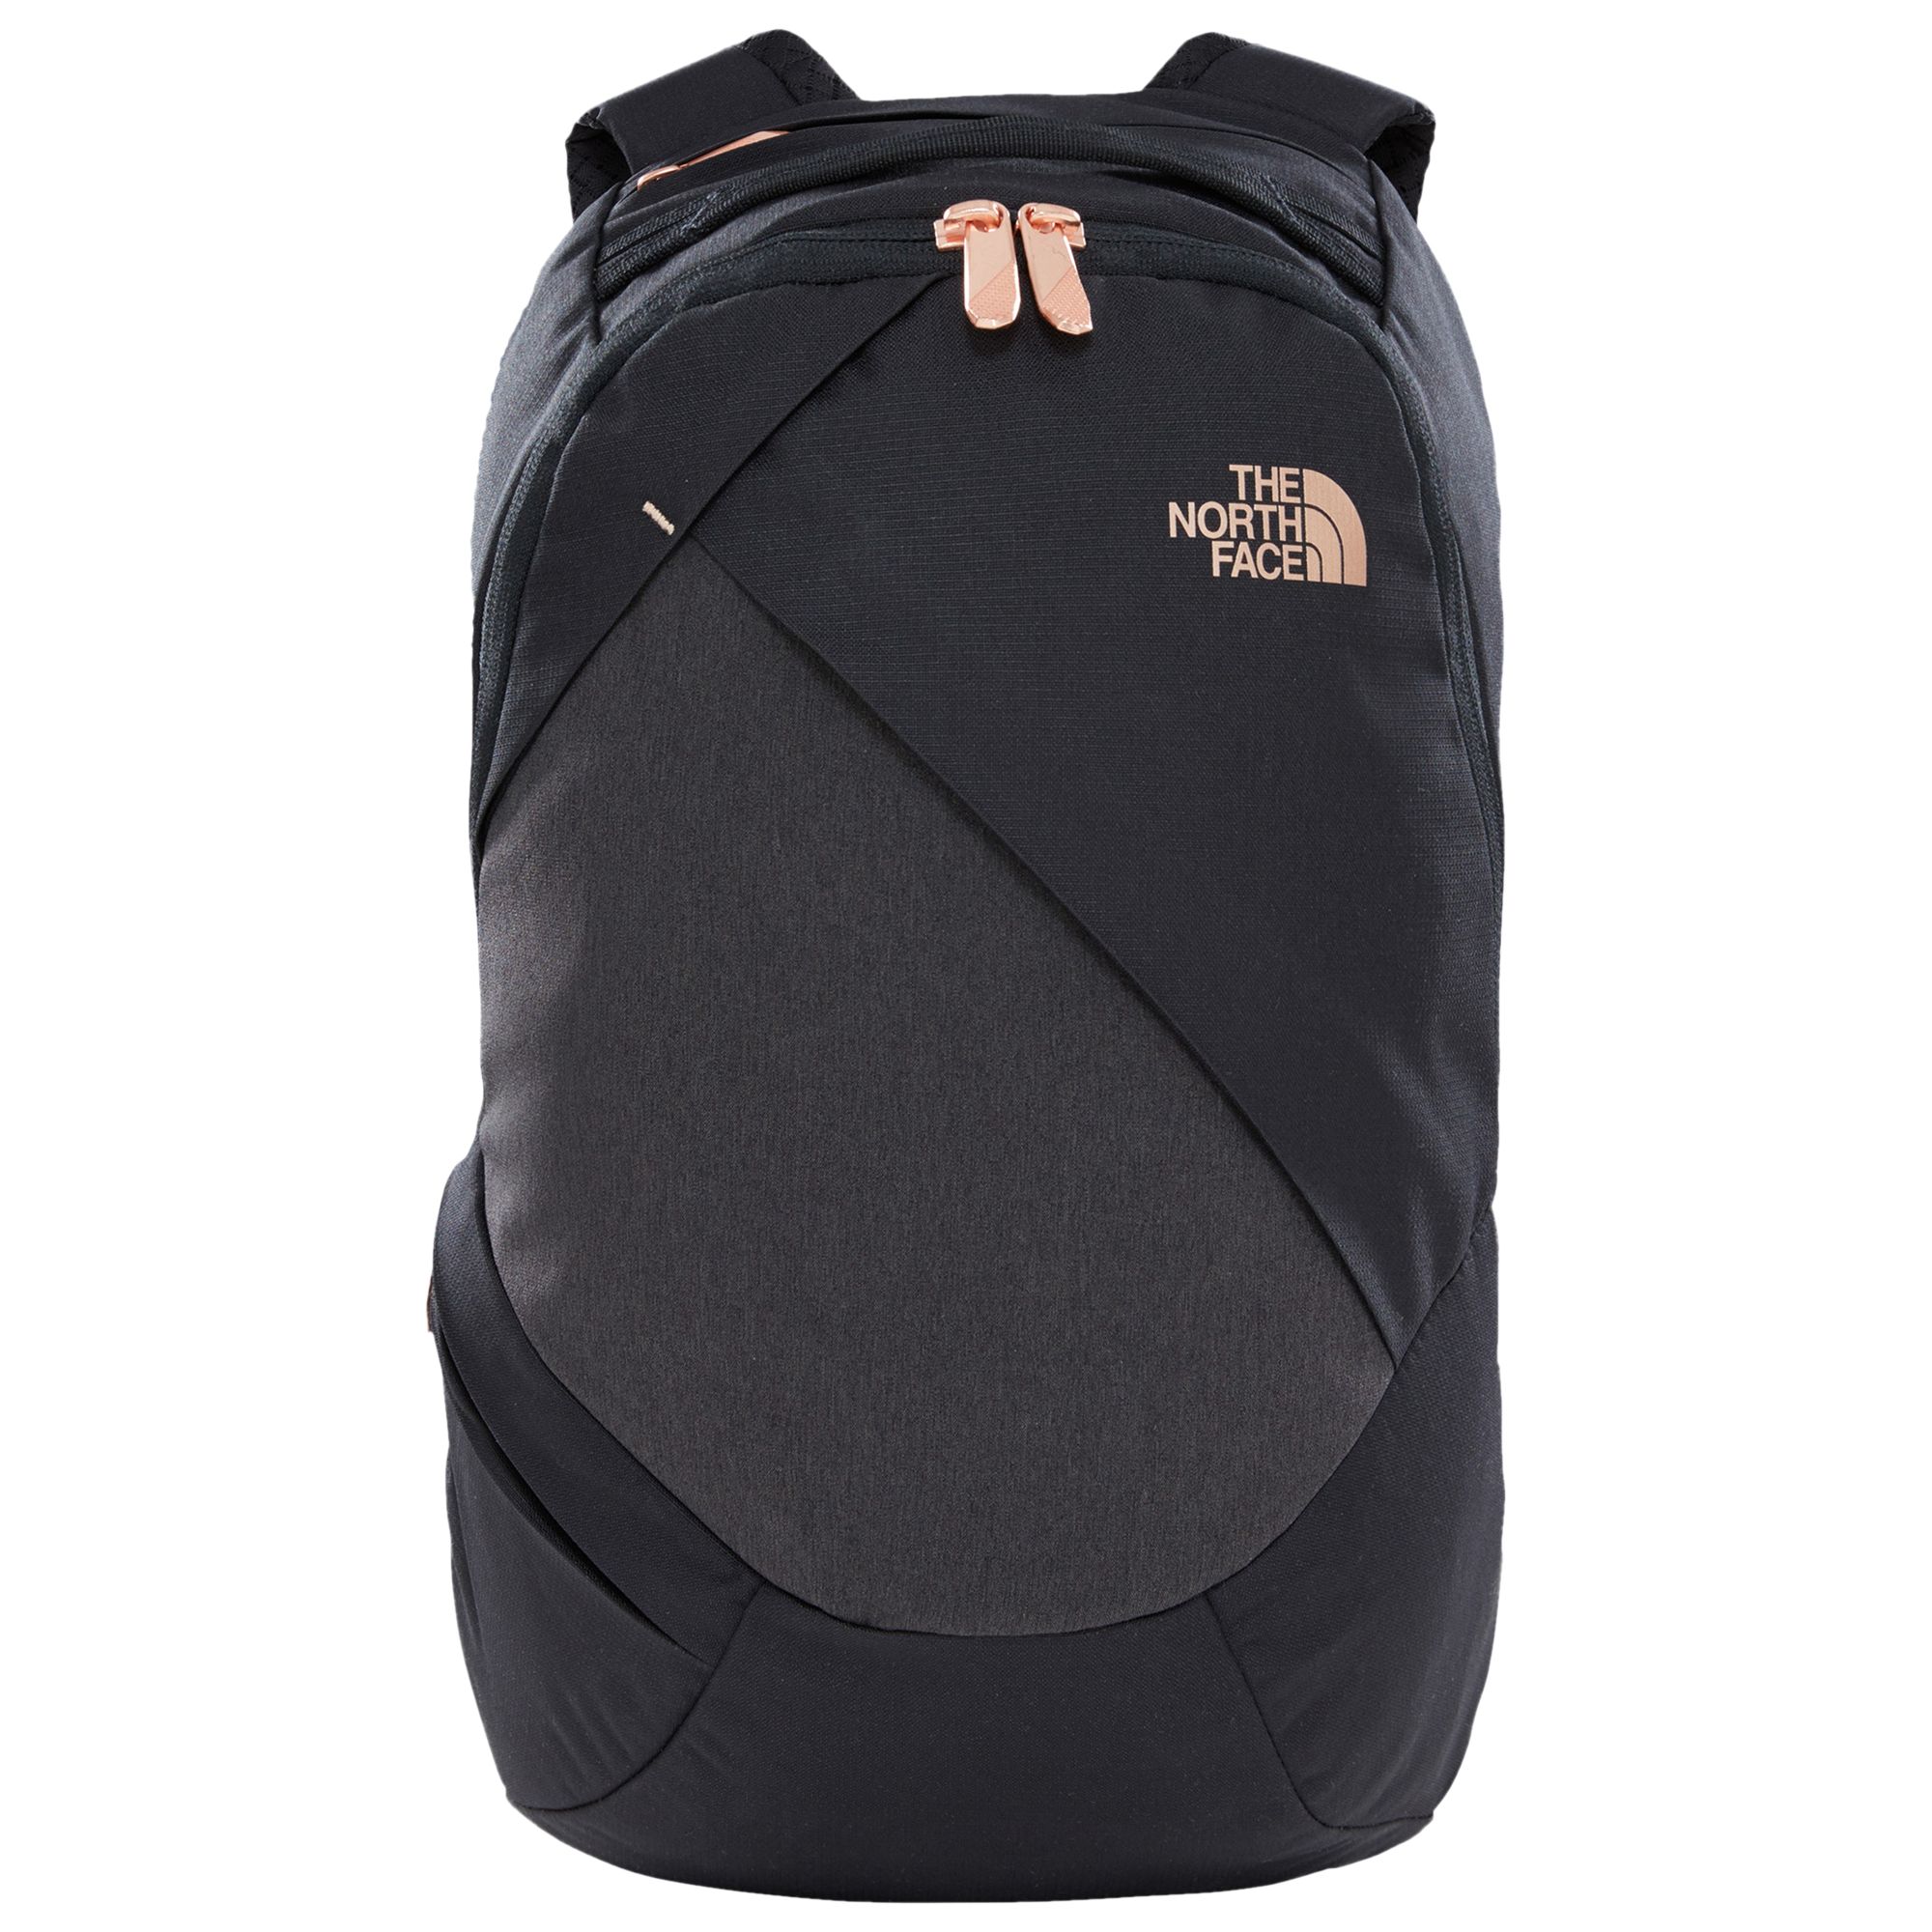 The North Face Electra Women S Backpack Black At John Lewis Partners